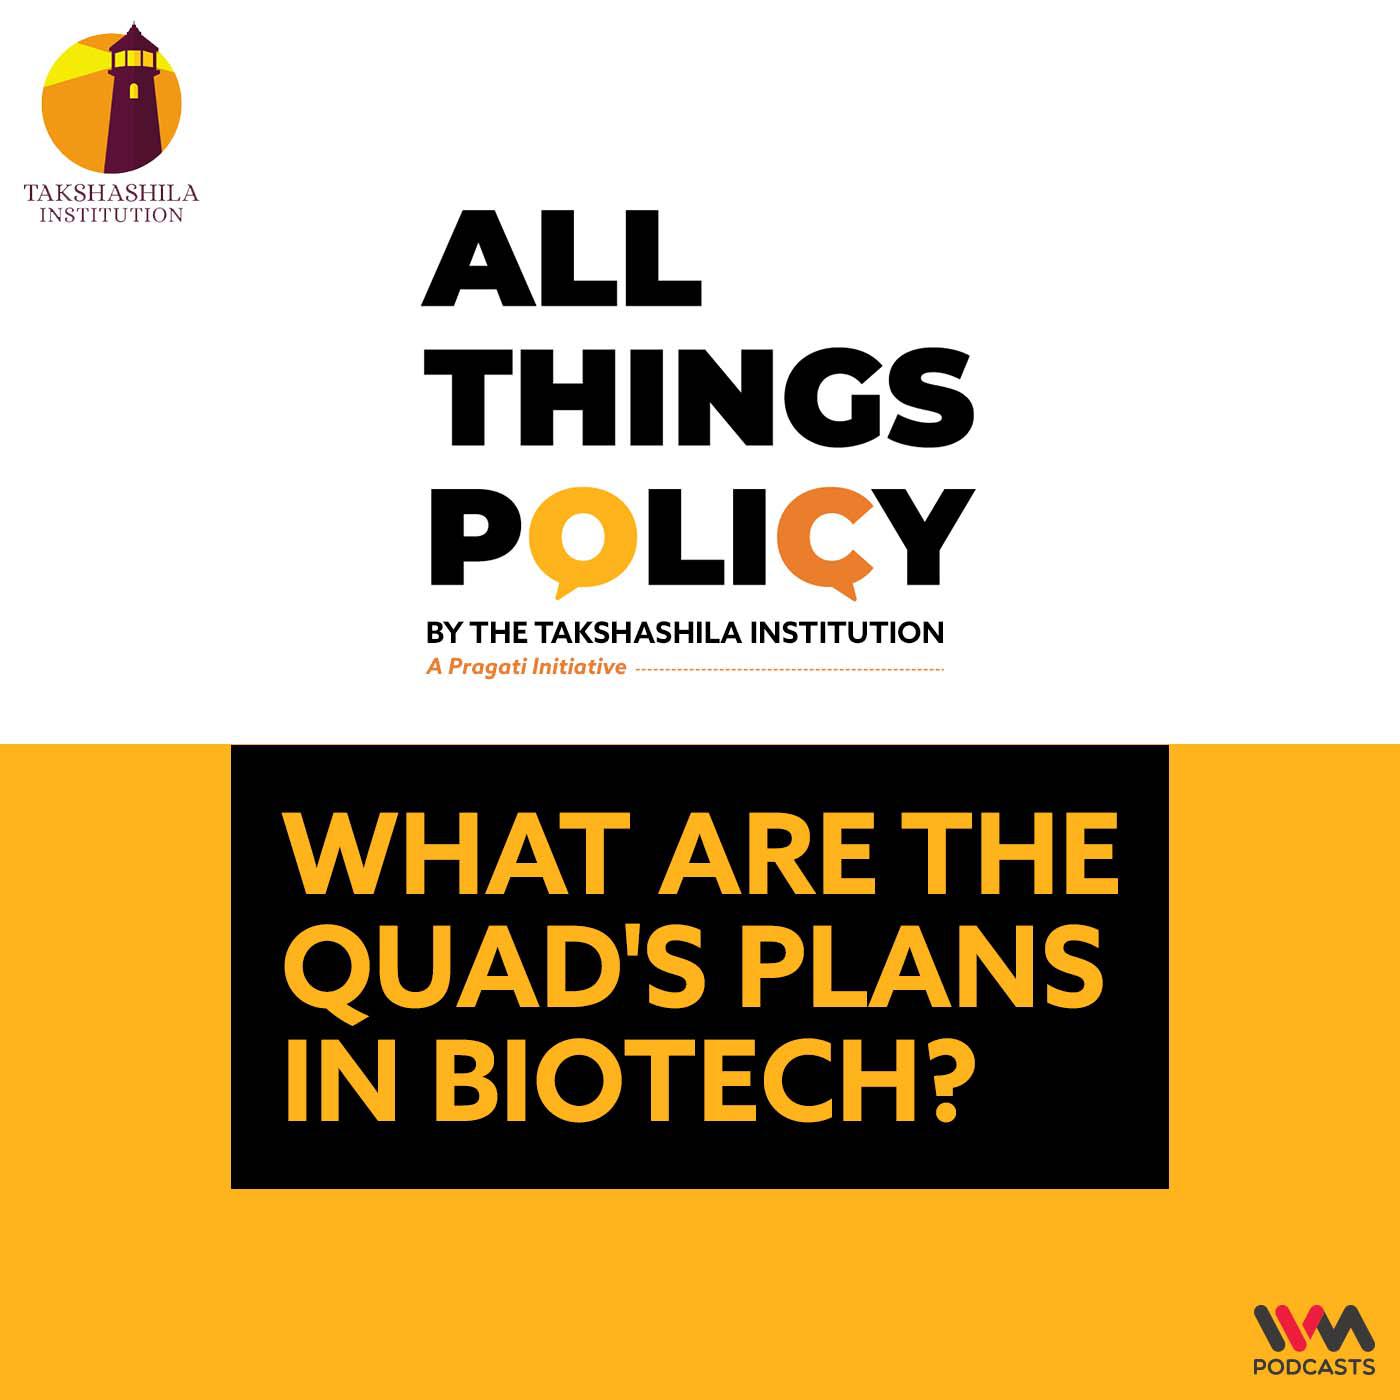 What are the Quad's plans in Biotech?